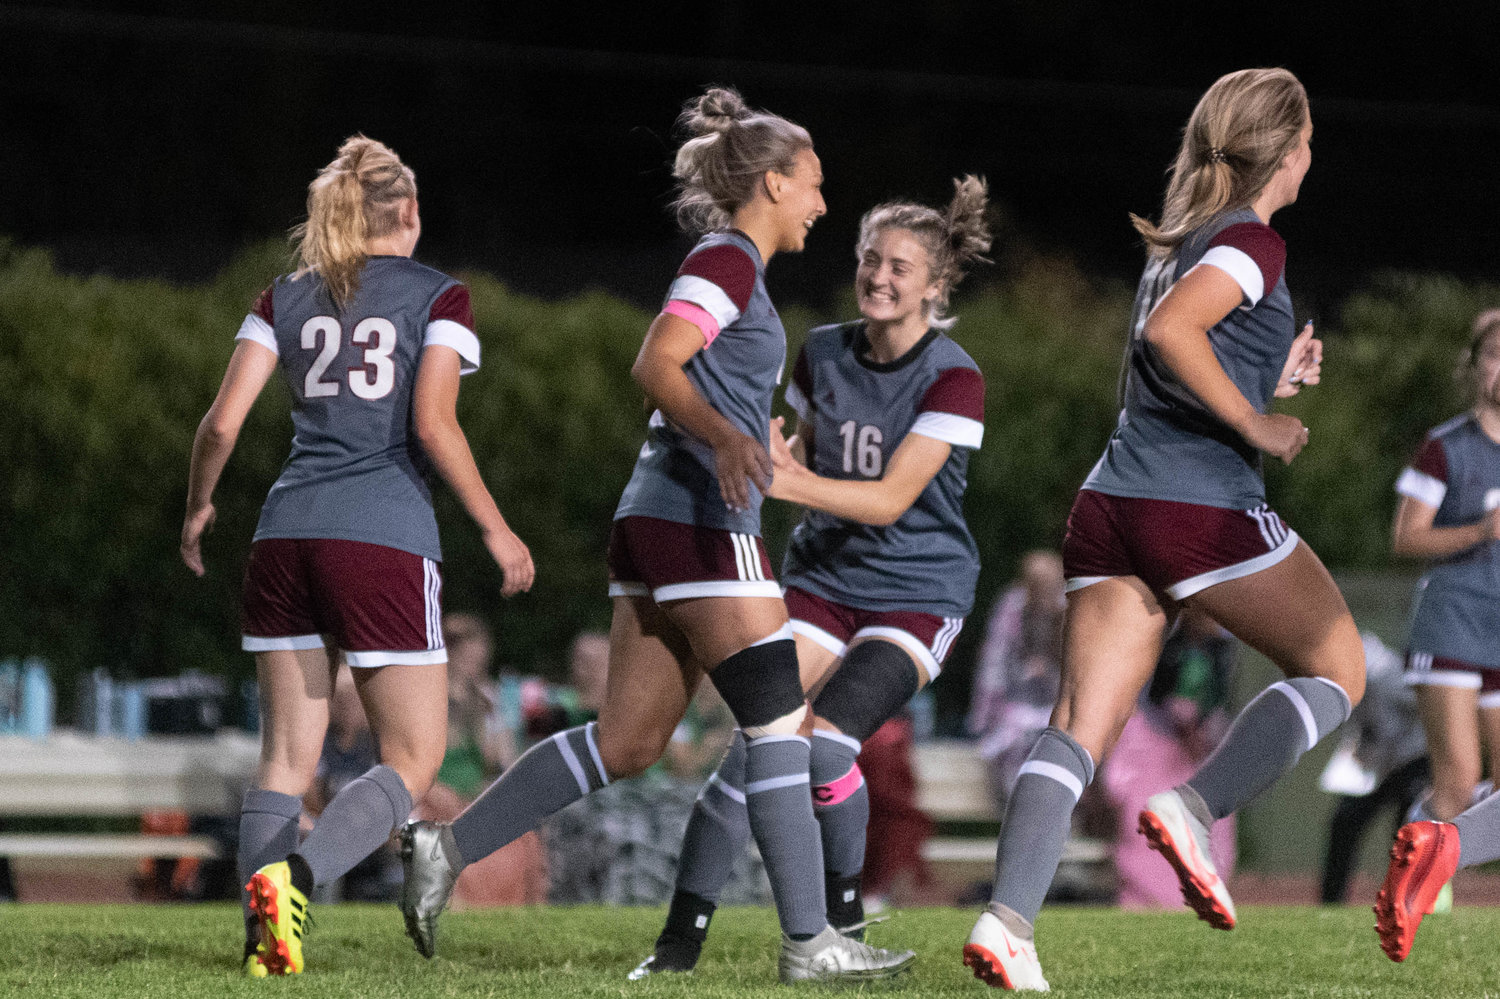 Senior defender Kaylynne Dowling (16) embraces junior Cameron Sheets after a goal in W.F. West's win over Centralia Thursday night.